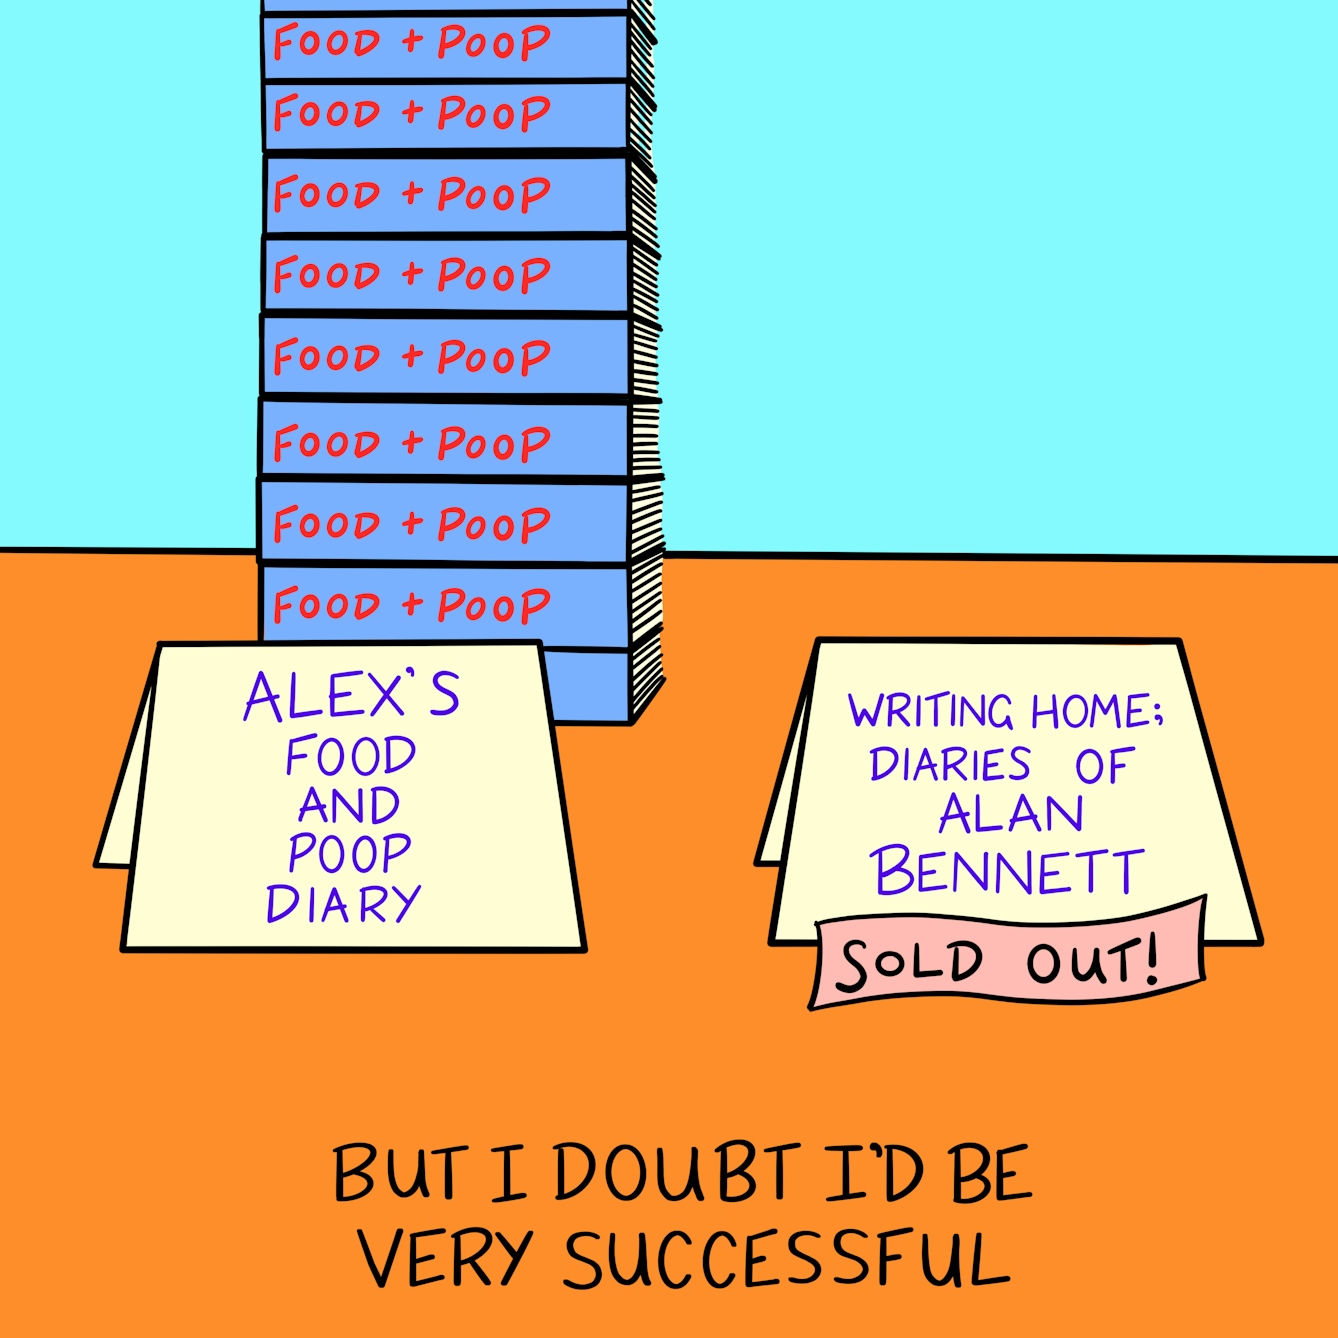 Panel 4 of a four-panel comic drawn digitally: two sets of folded card are on a table, one reading "Alex's Food and Poop Diary" with a big stack of books behind it and the other "Writing Home; Diaries of Alan Bennett" has no books and instead has a "Sold Out!" label. The caption text reads "But I doubt I'd be very successful"